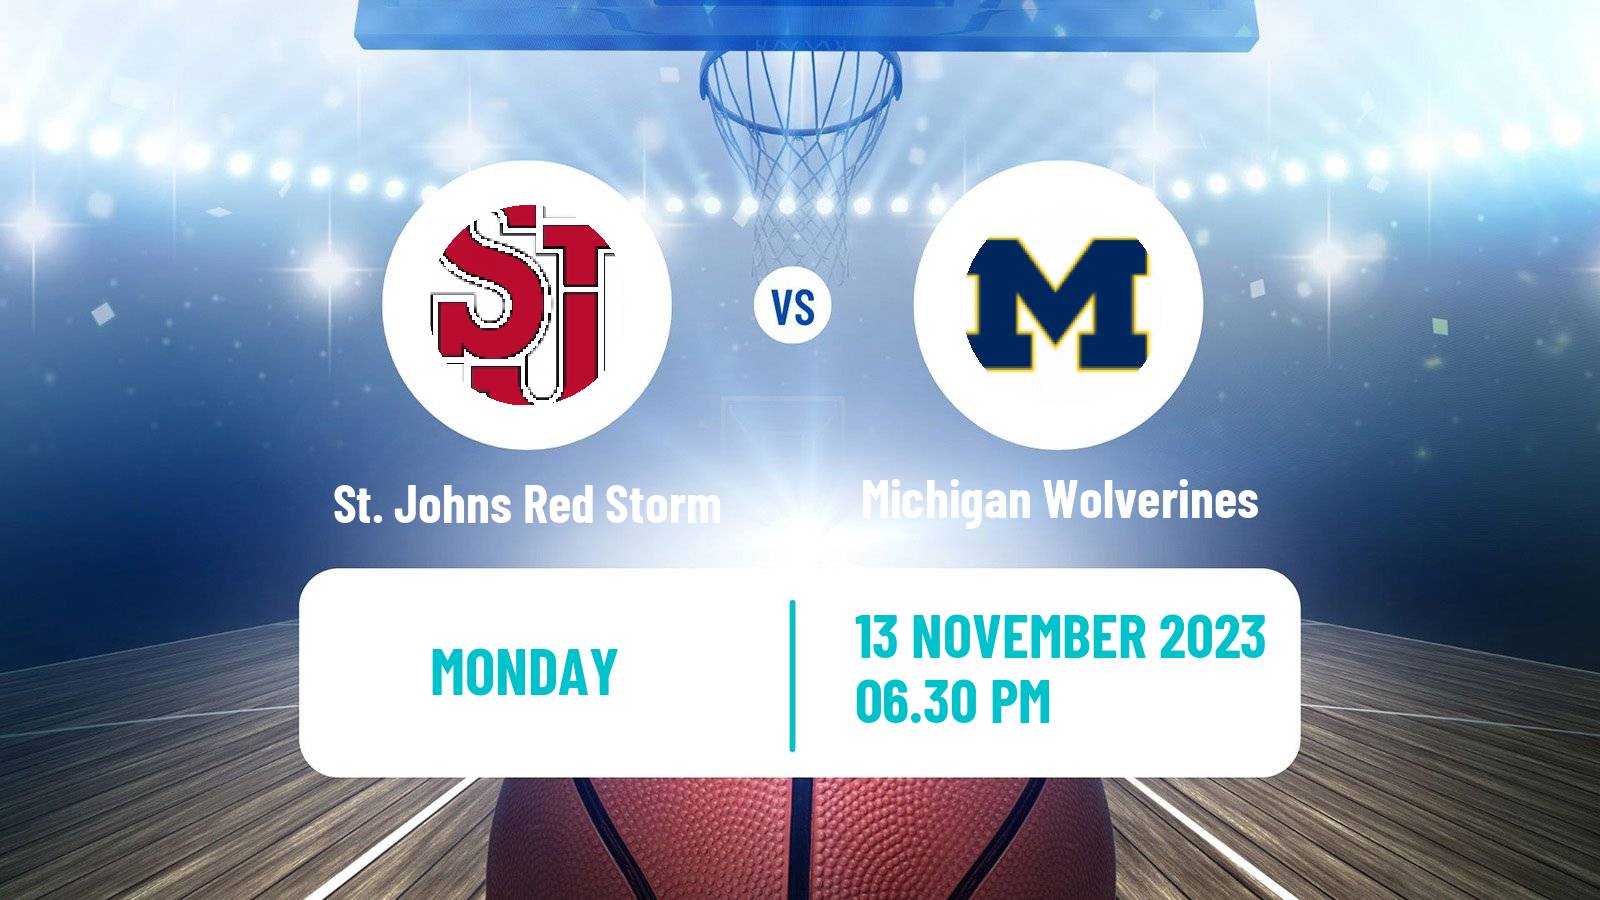 Basketball NCAA College Basketball St. Johns Red Storm - Michigan Wolverines